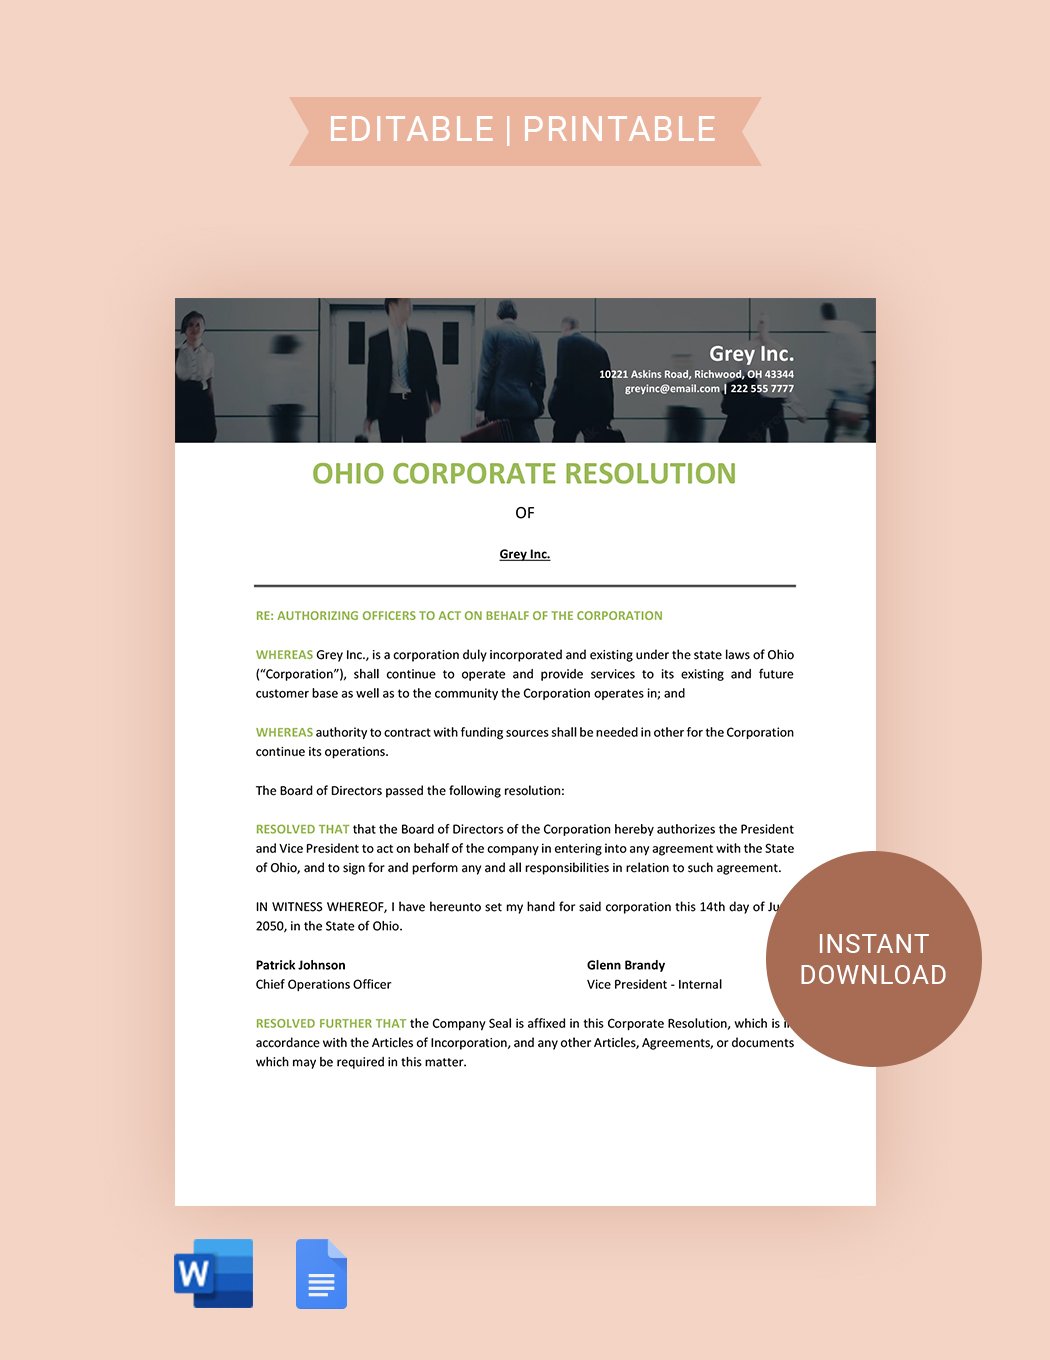 Ohio Corporate Resolution Template in Word, Google Docs